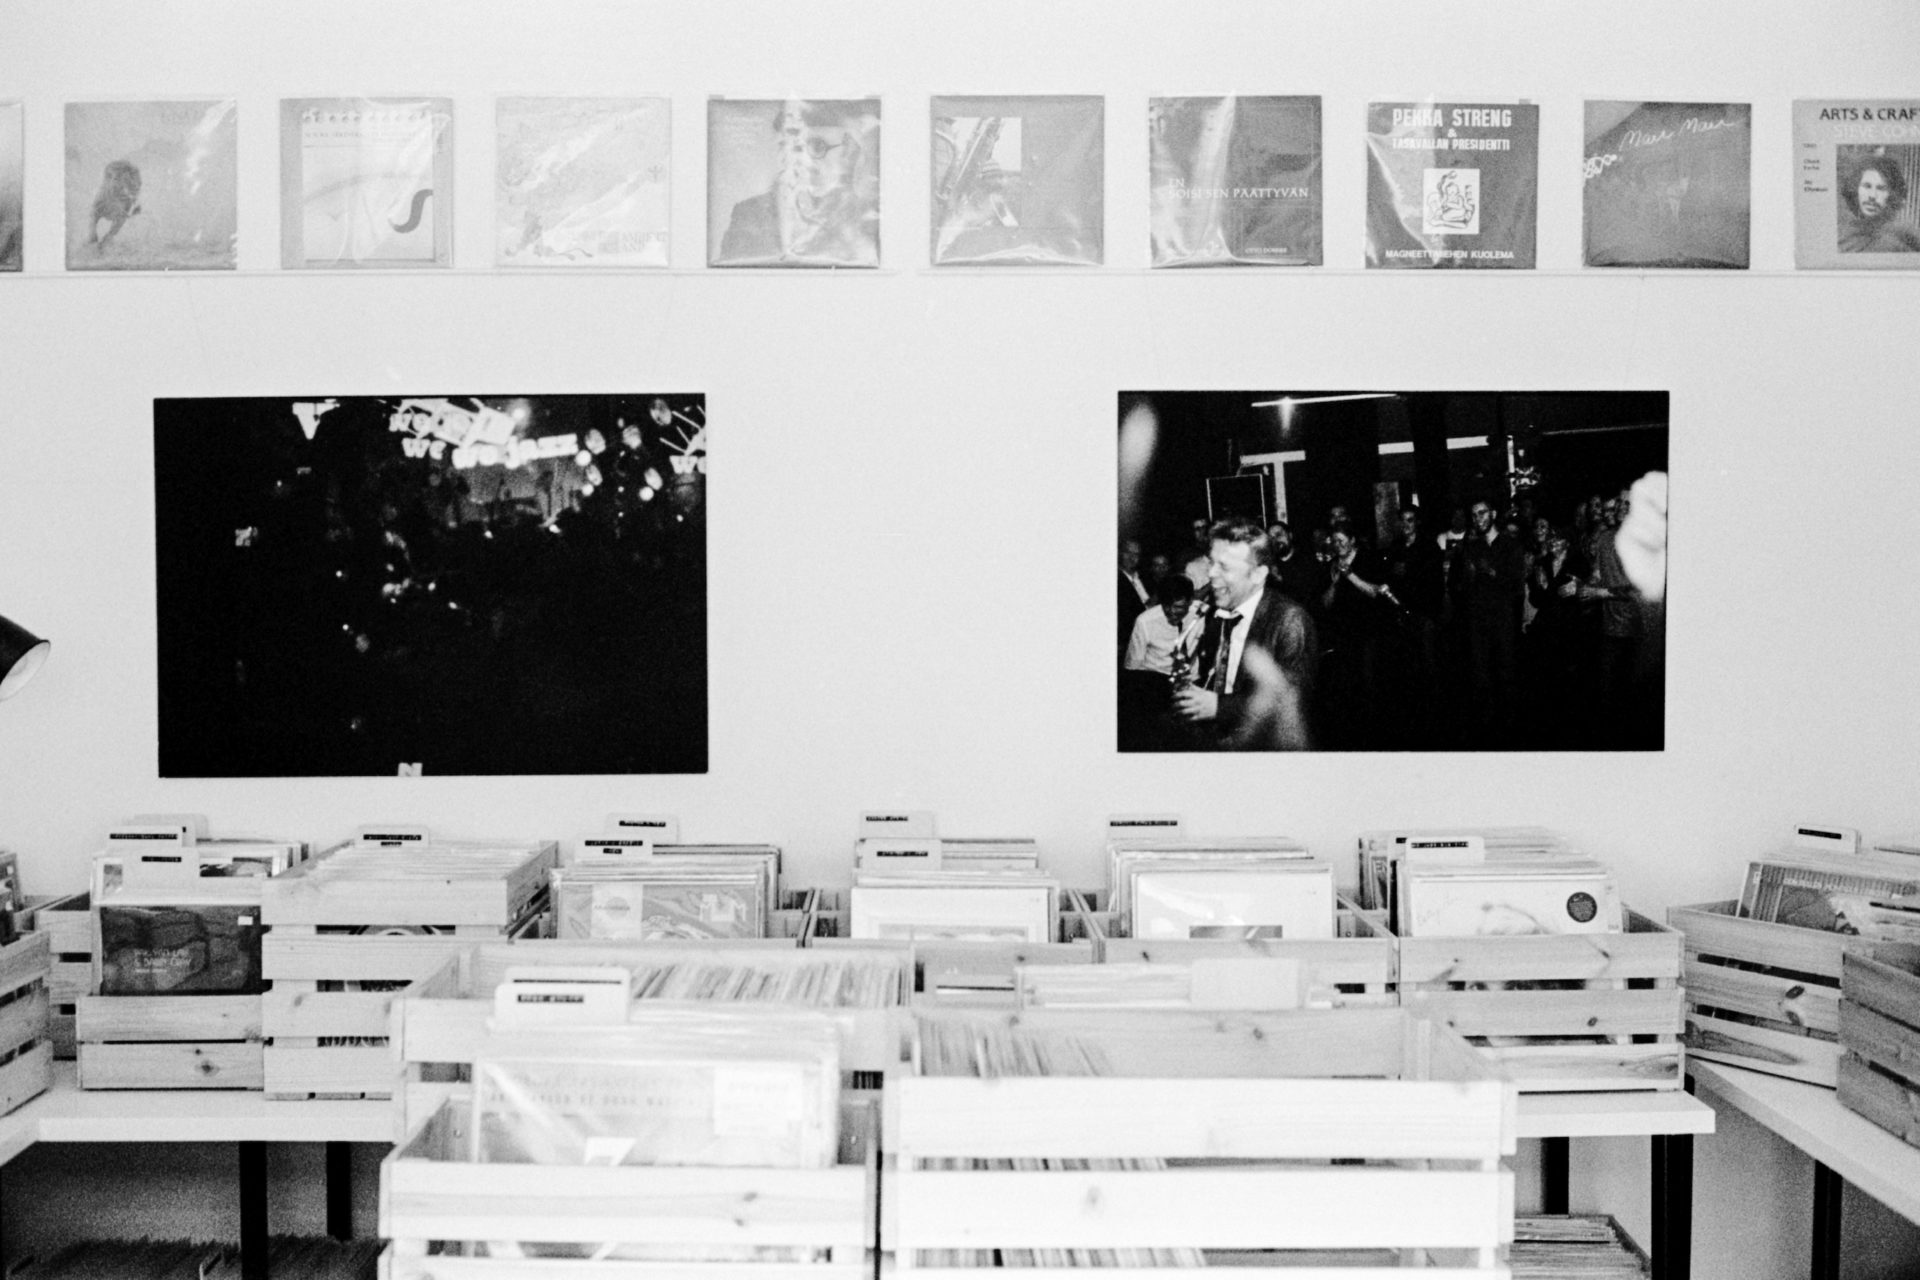 We Jazz Record Shop - 1 of 6